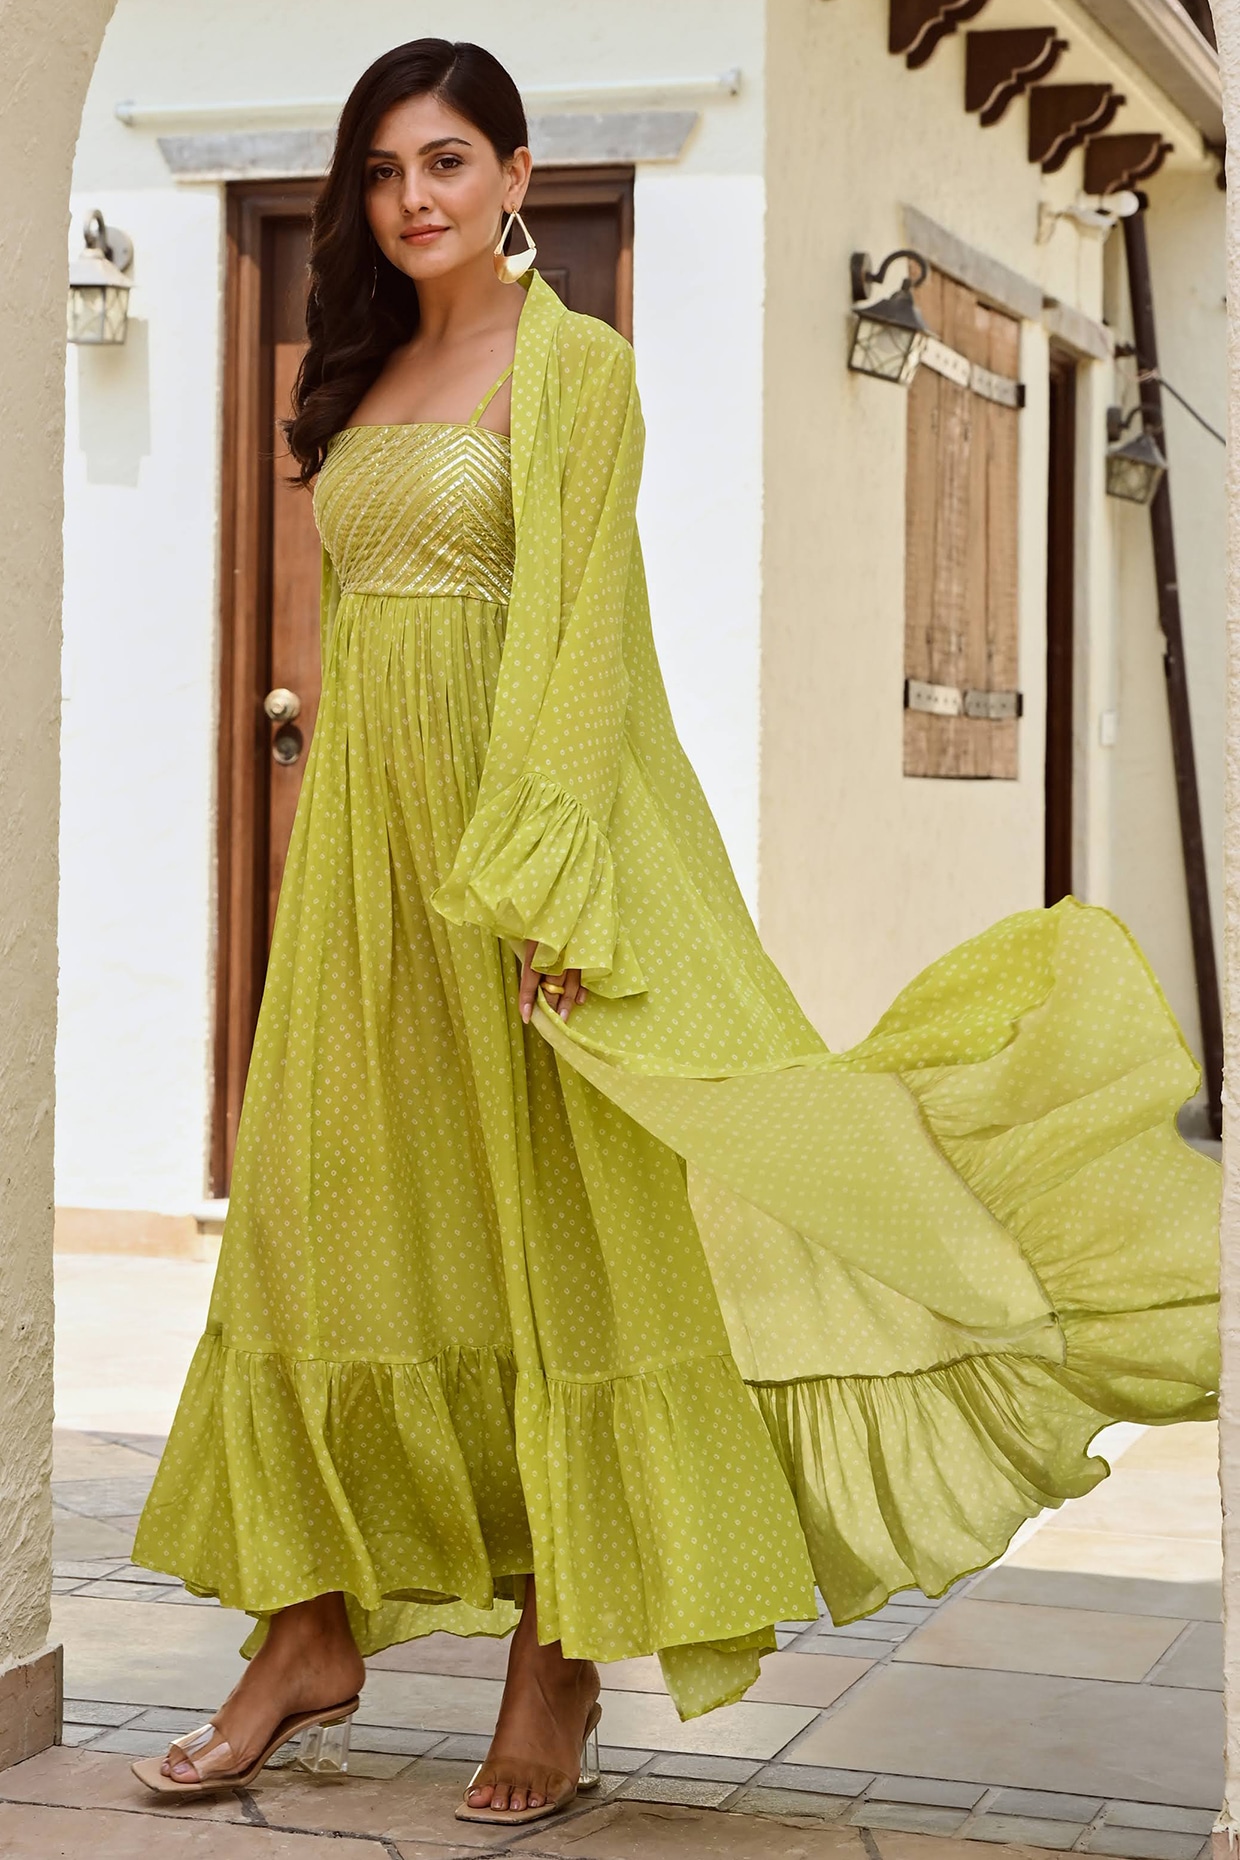 Girls Attire of Marriage | Long dress casual, Trendy party dresses, Long  jacket dresses